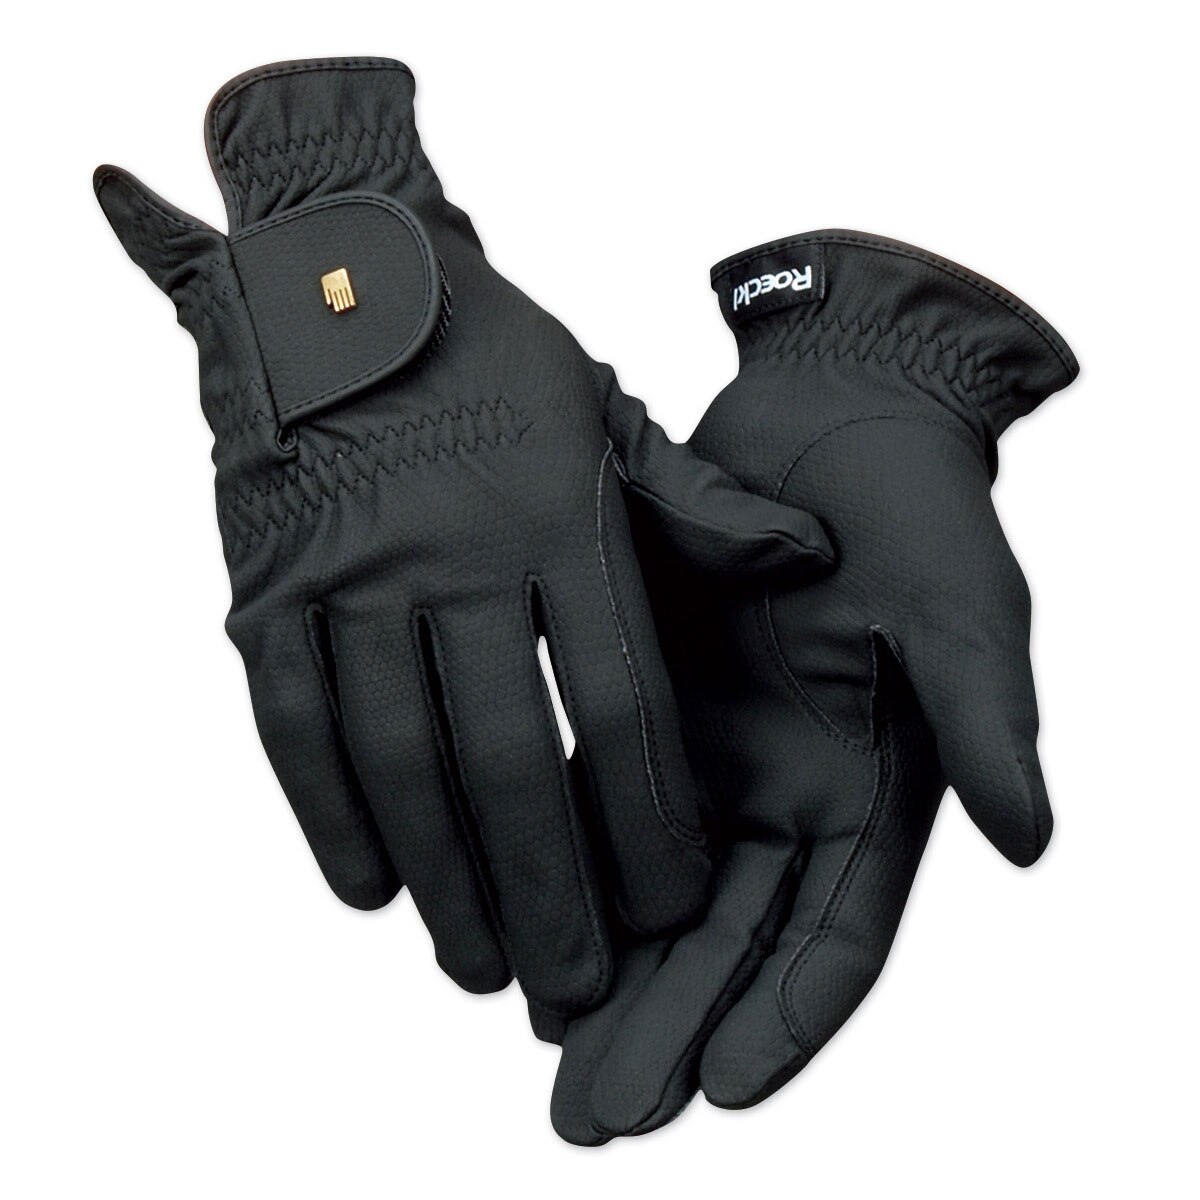 Riding Gloves ROECK Grip Roeckl 